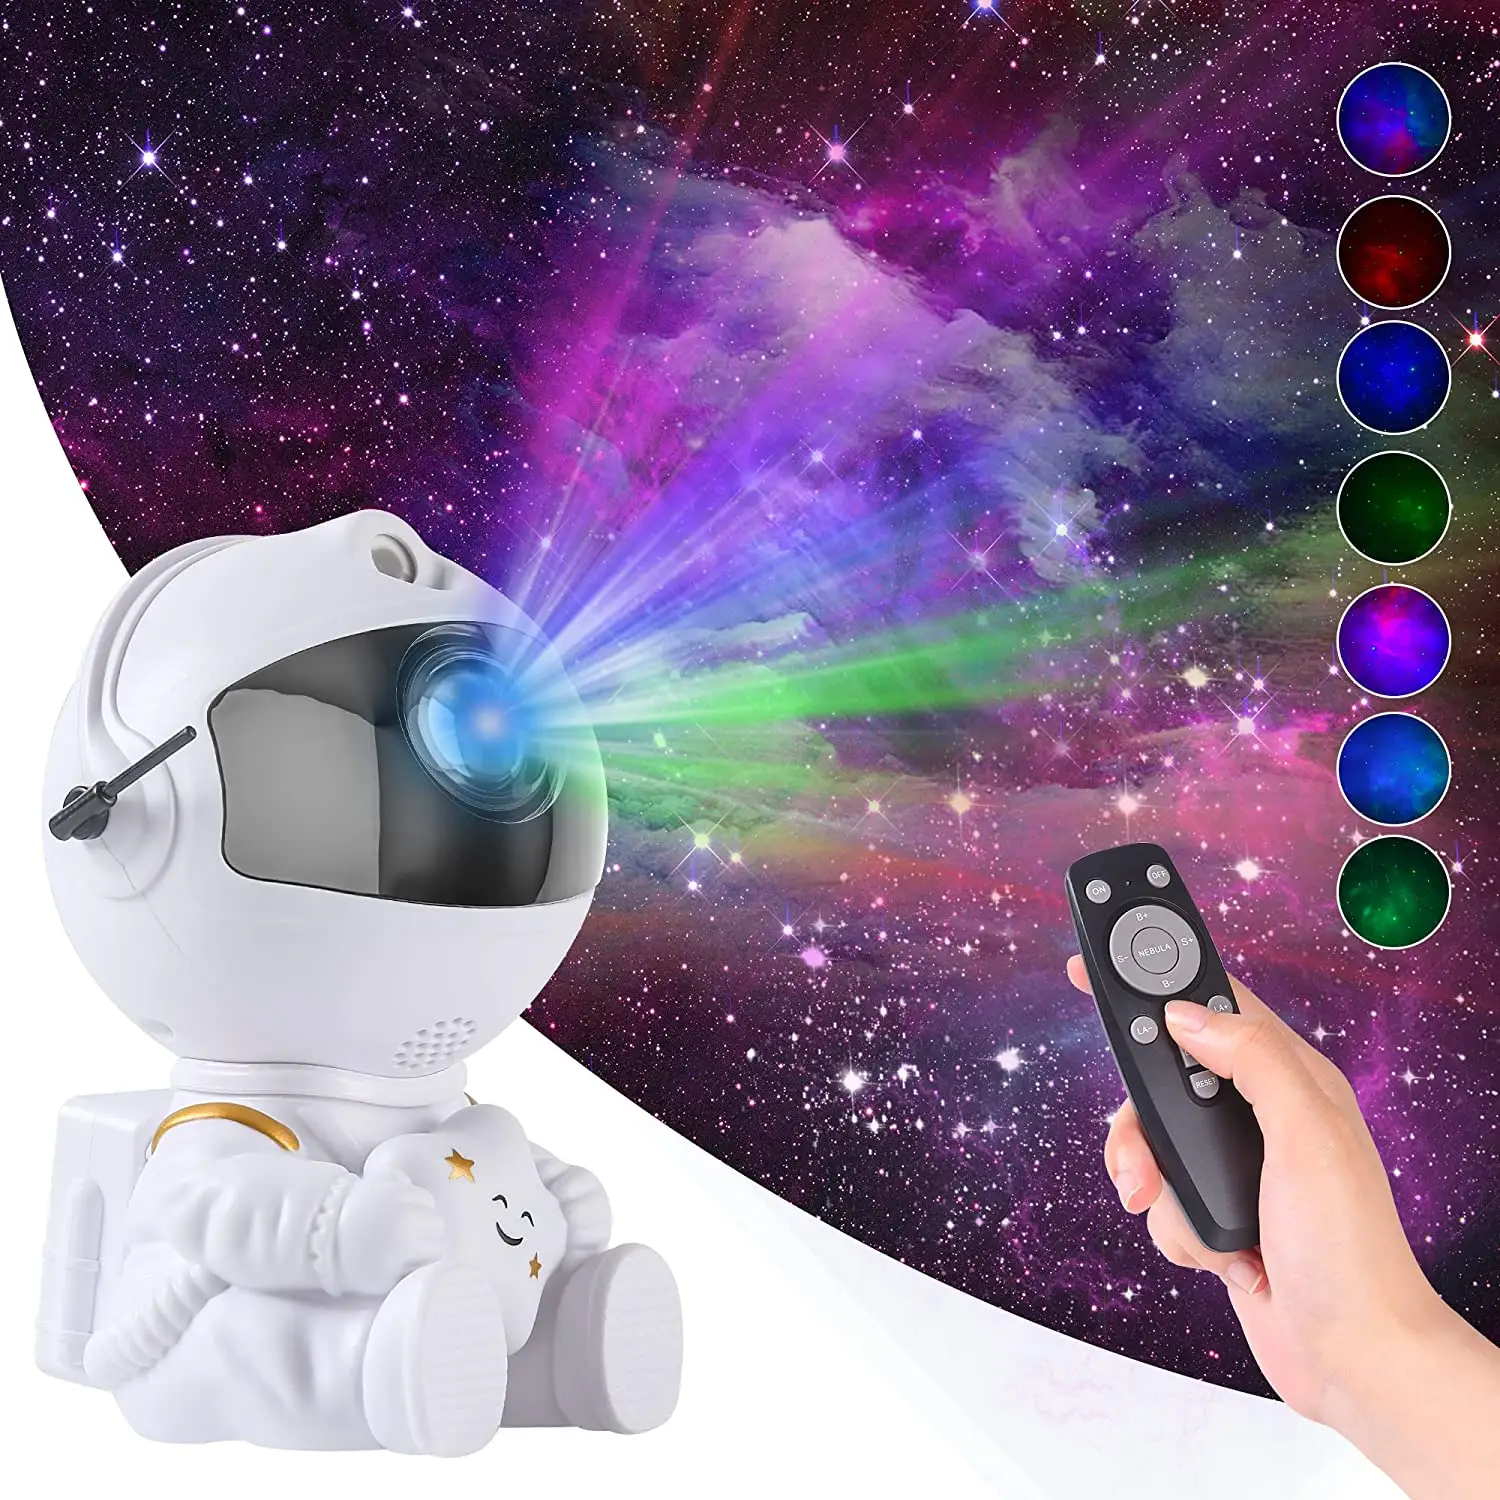 Smart Home Lights Star Aurora Projector Led Astronaut Lamp Usb Starry Northern Galaxy Night Light With Remote Control